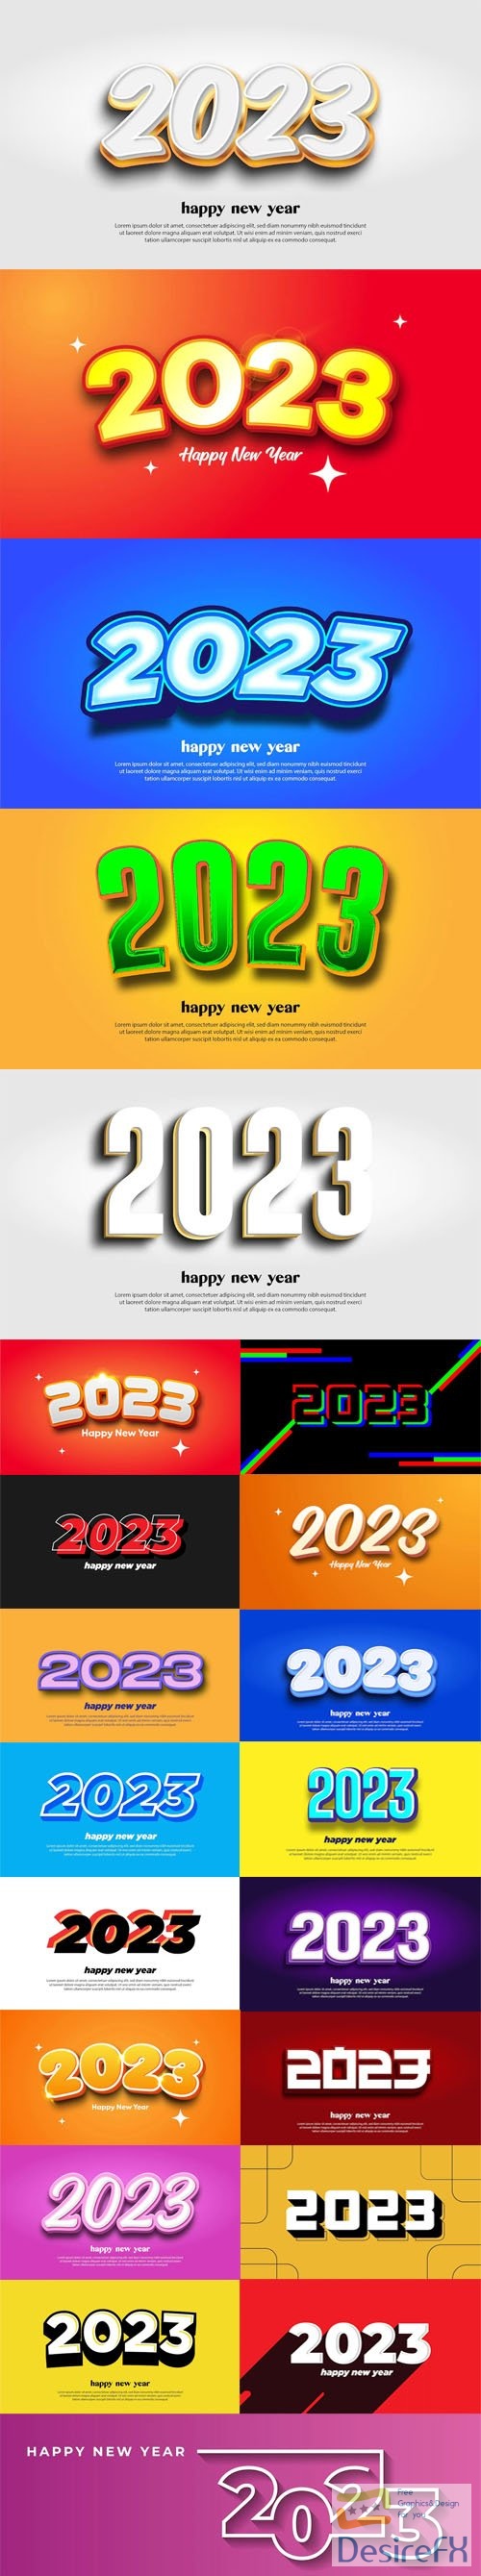 Happy New Year 2023 - 20+ Creative Vector Backgrounds Templates